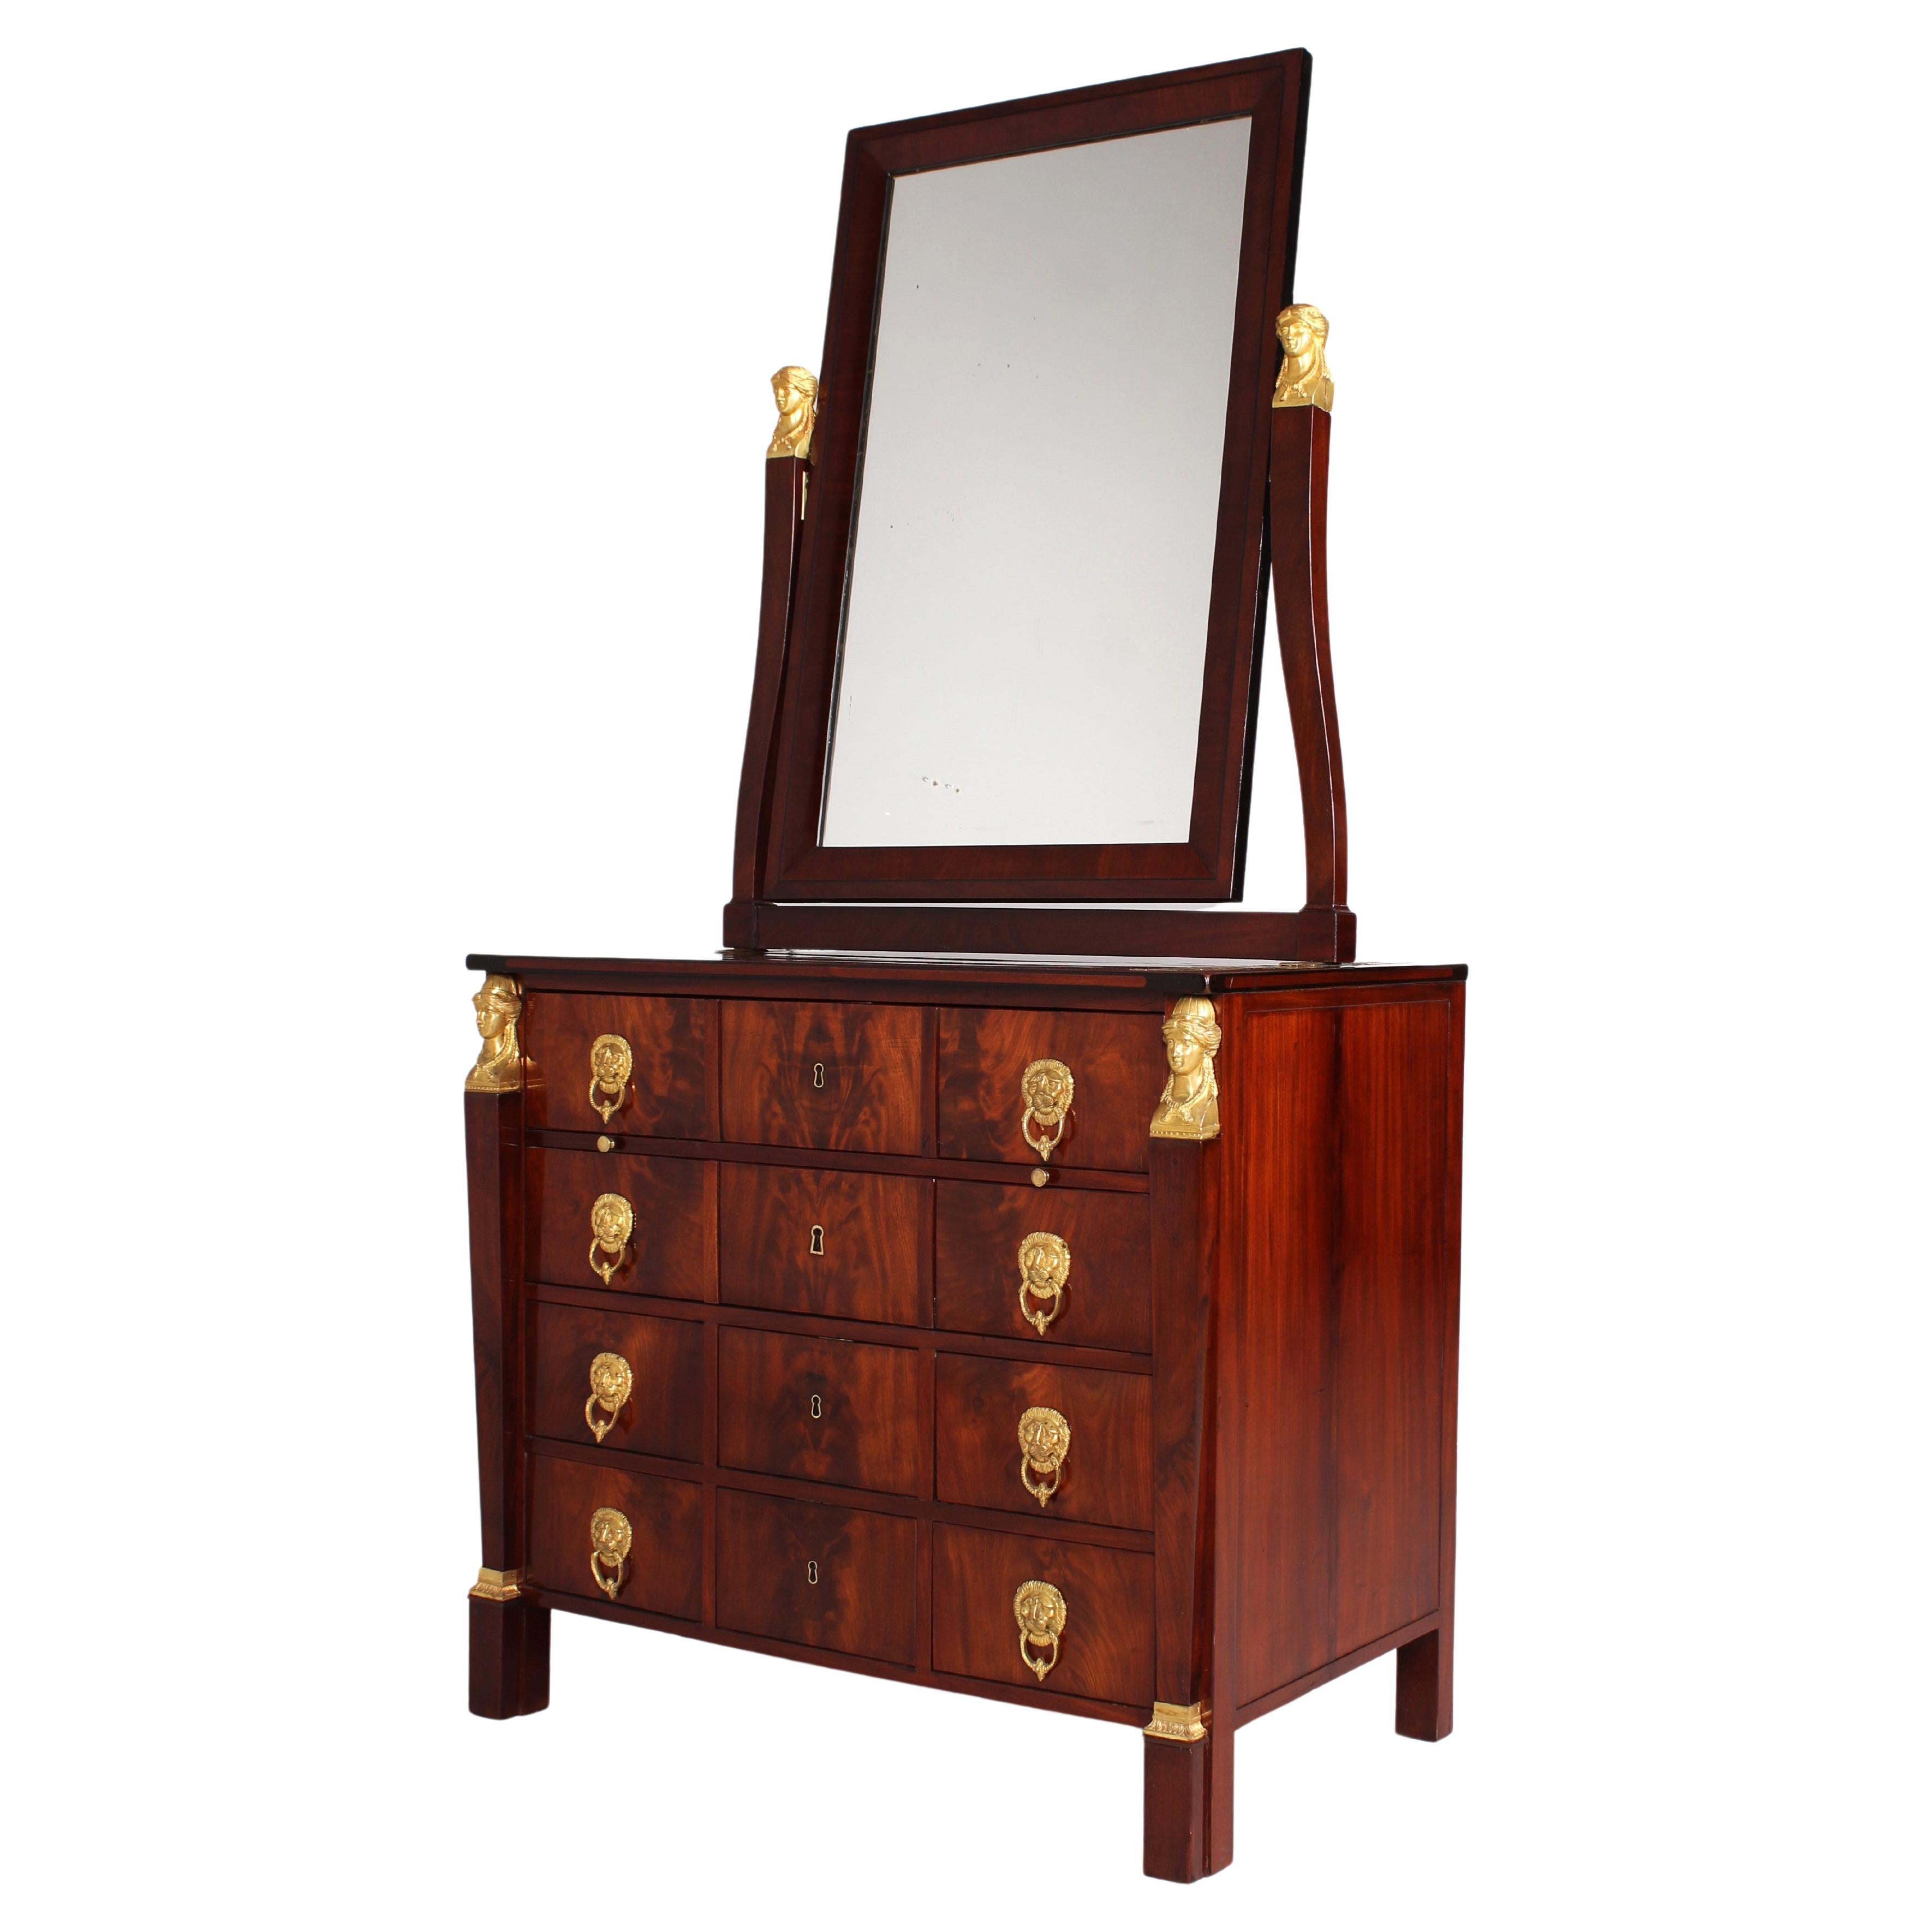 Dresser, Chest of Drawers, Mirror, stamped Jean-Joseph Chapuis, Brussels c. 1810